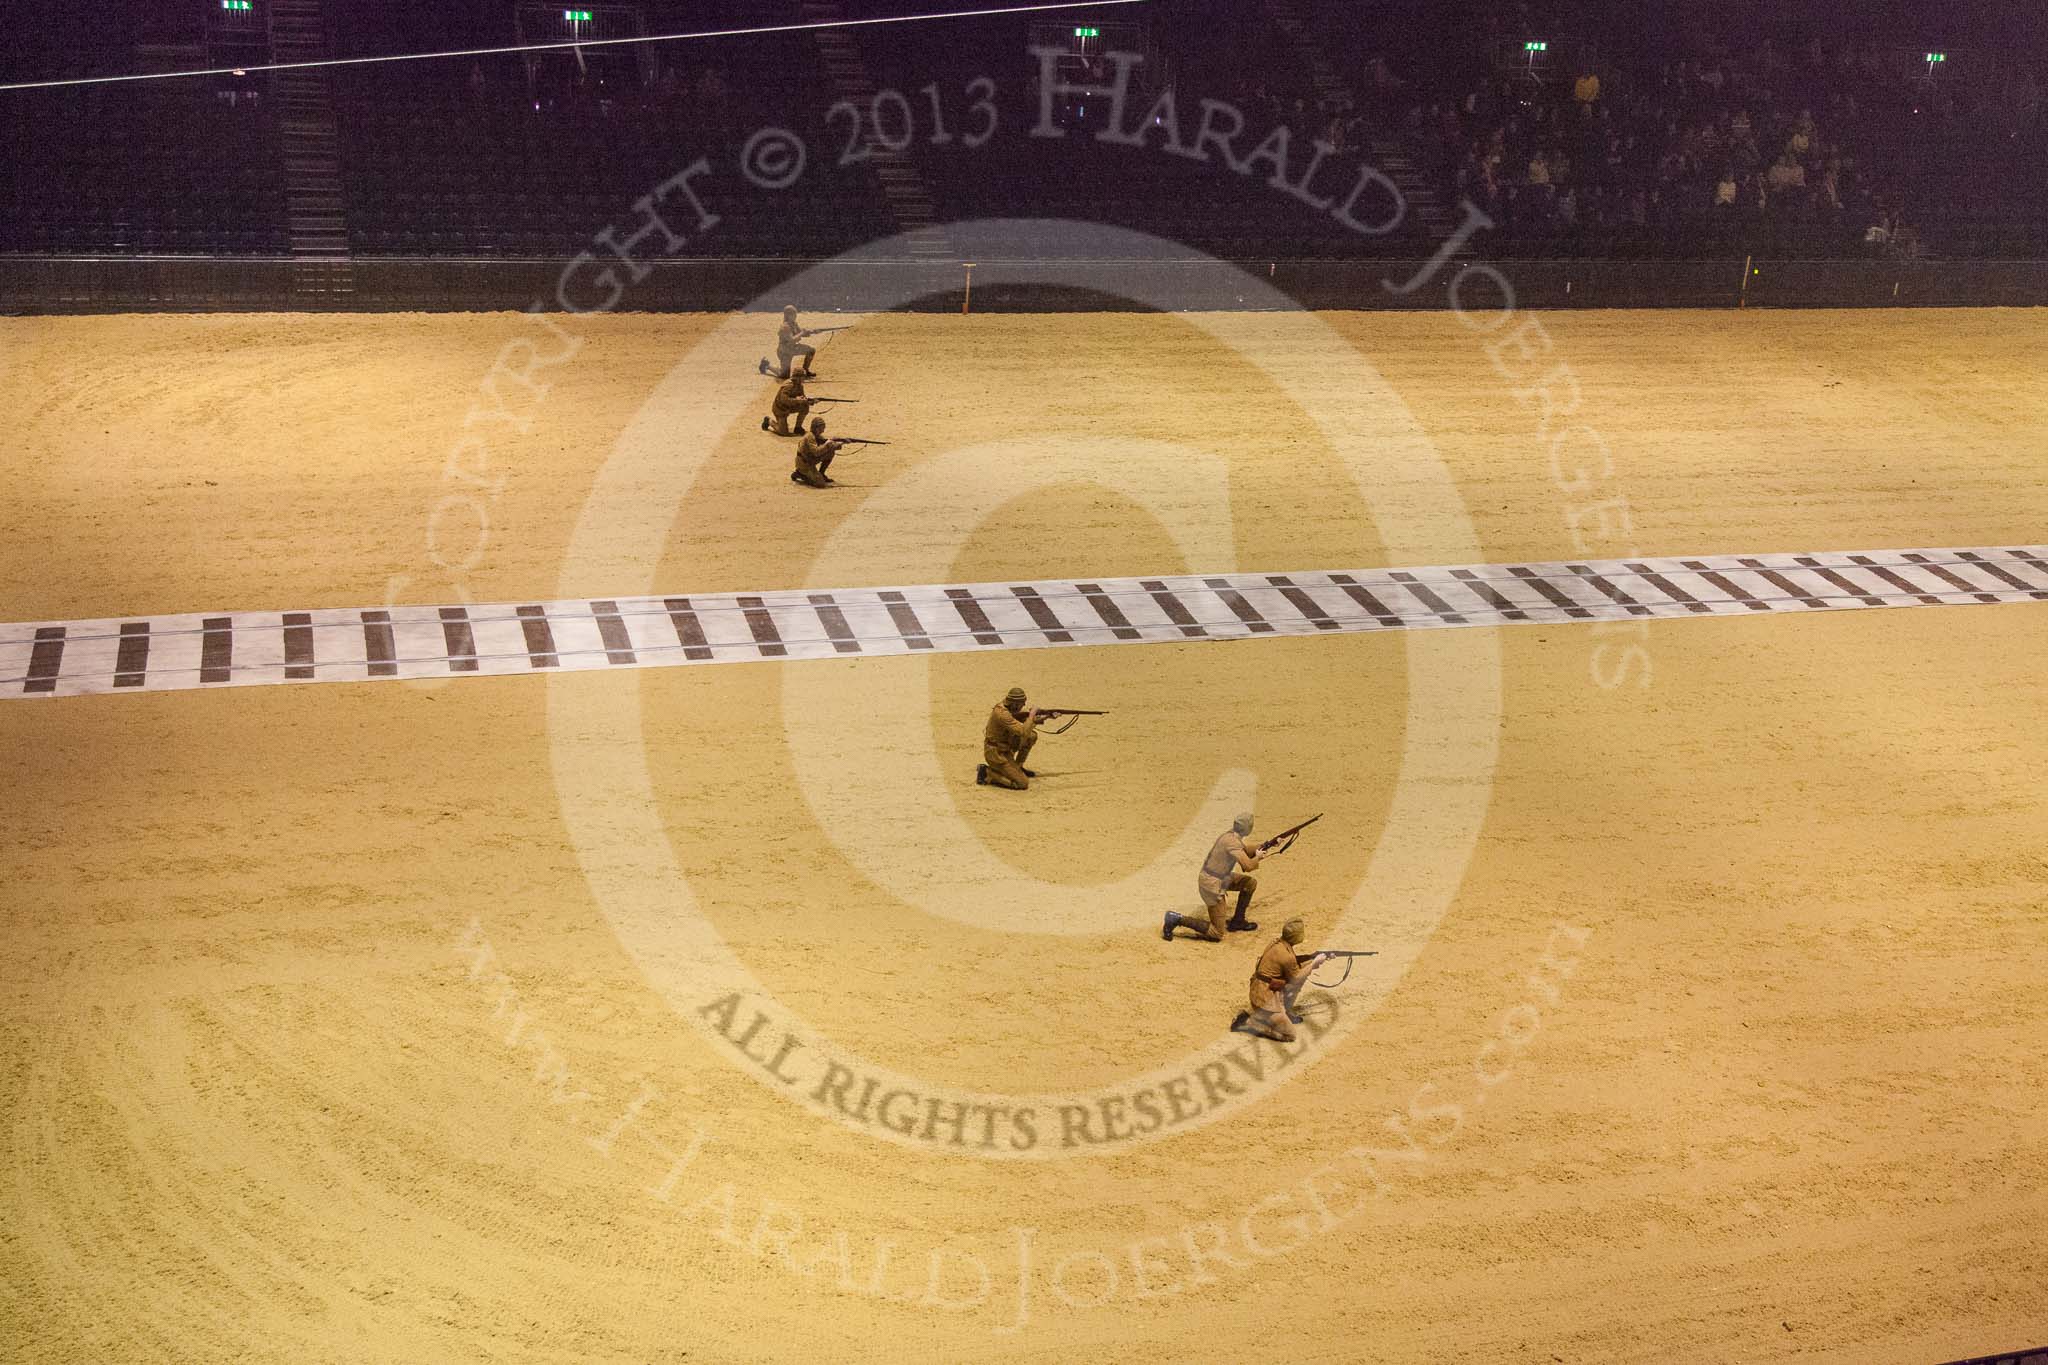 British Military Tournament 2013.
Earls Court,
London SW5,

United Kingdom,
on 06 December 2013 at 15:02, image #84